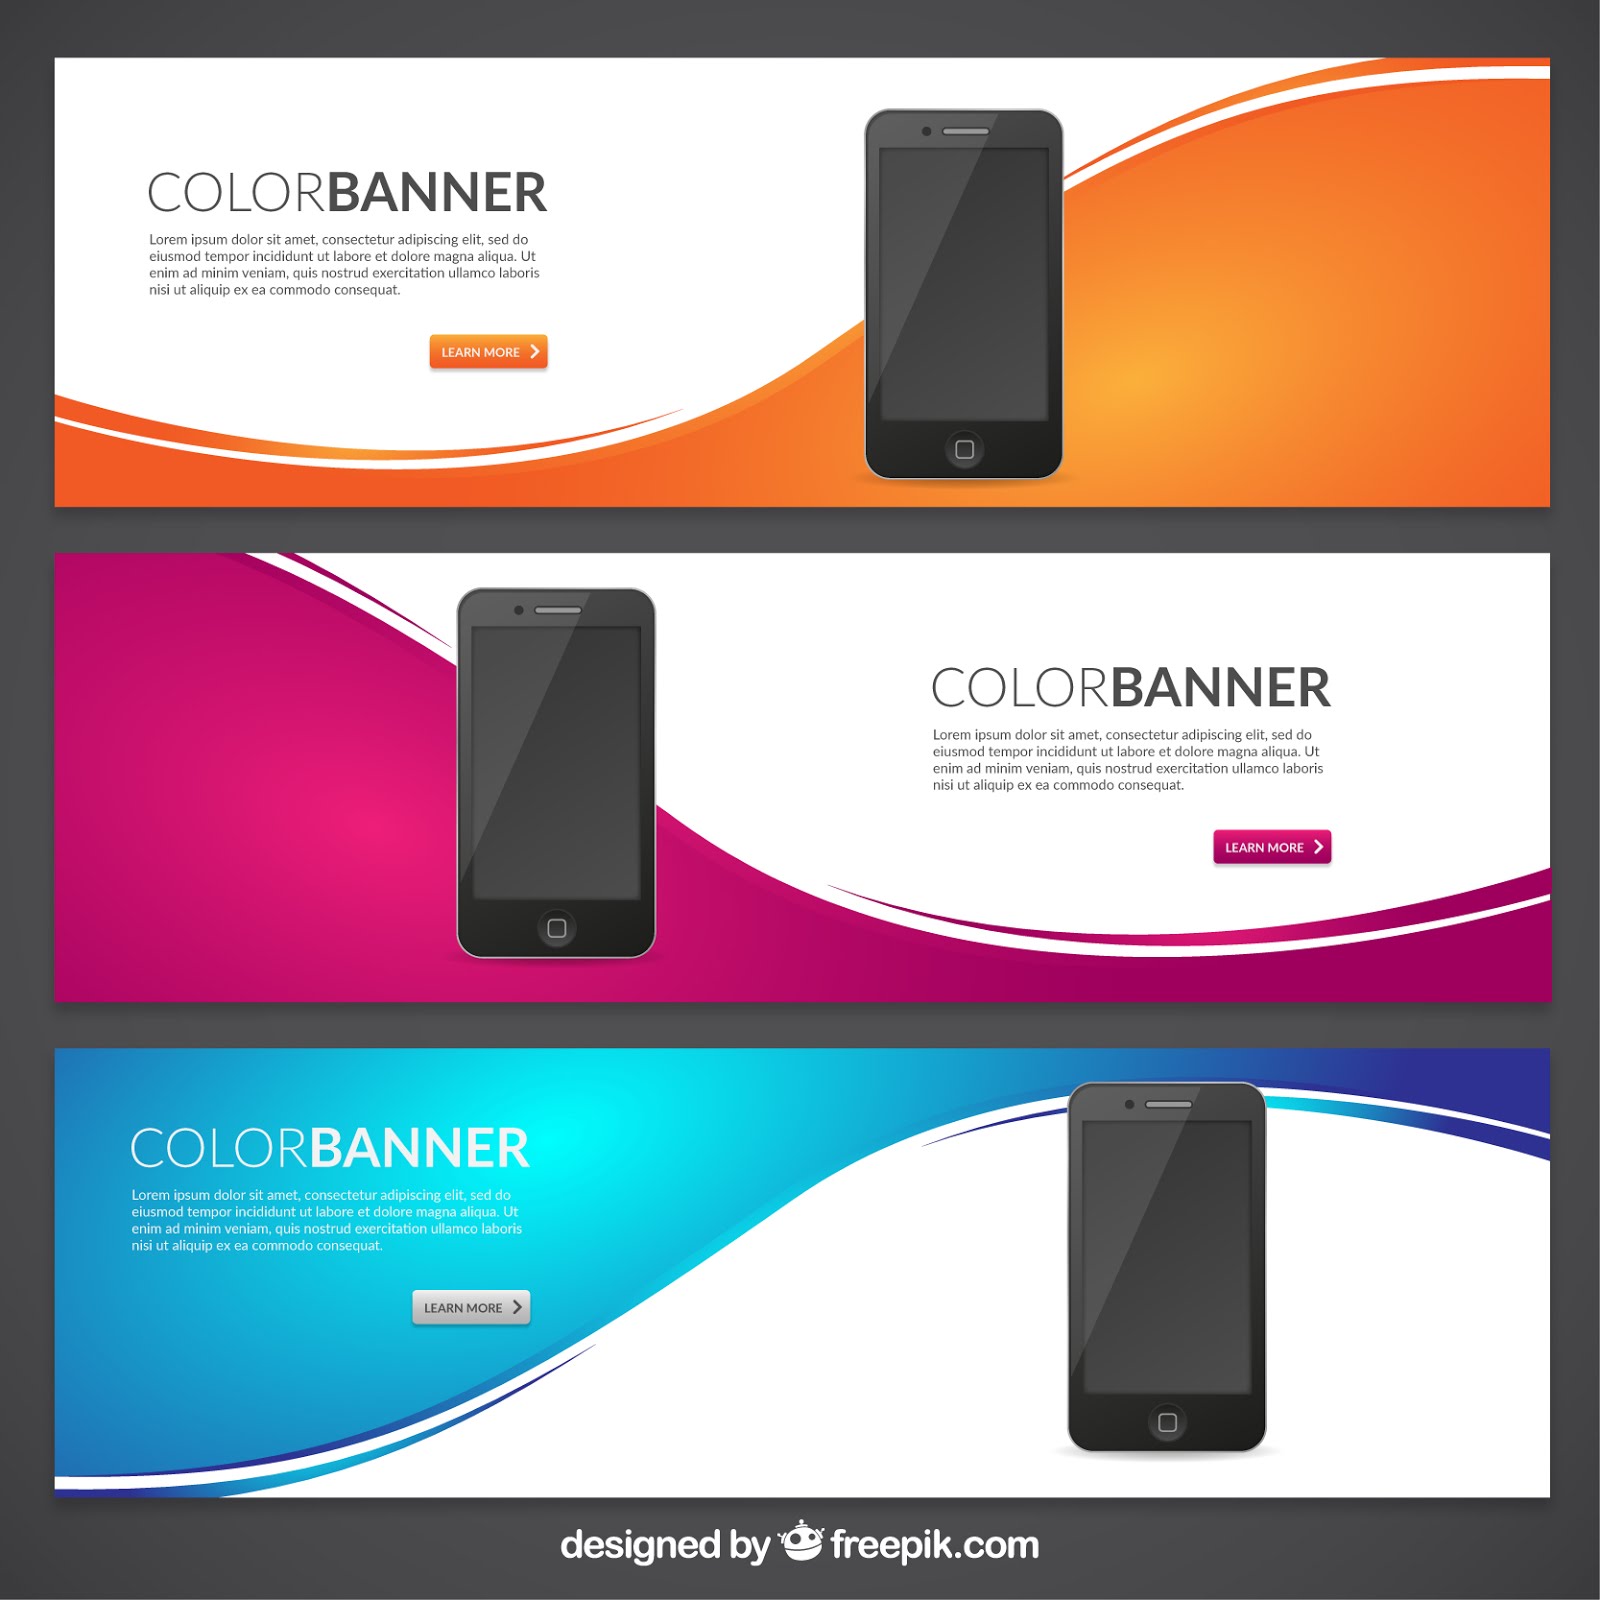 Download Free vector infographic banners | Free vectors